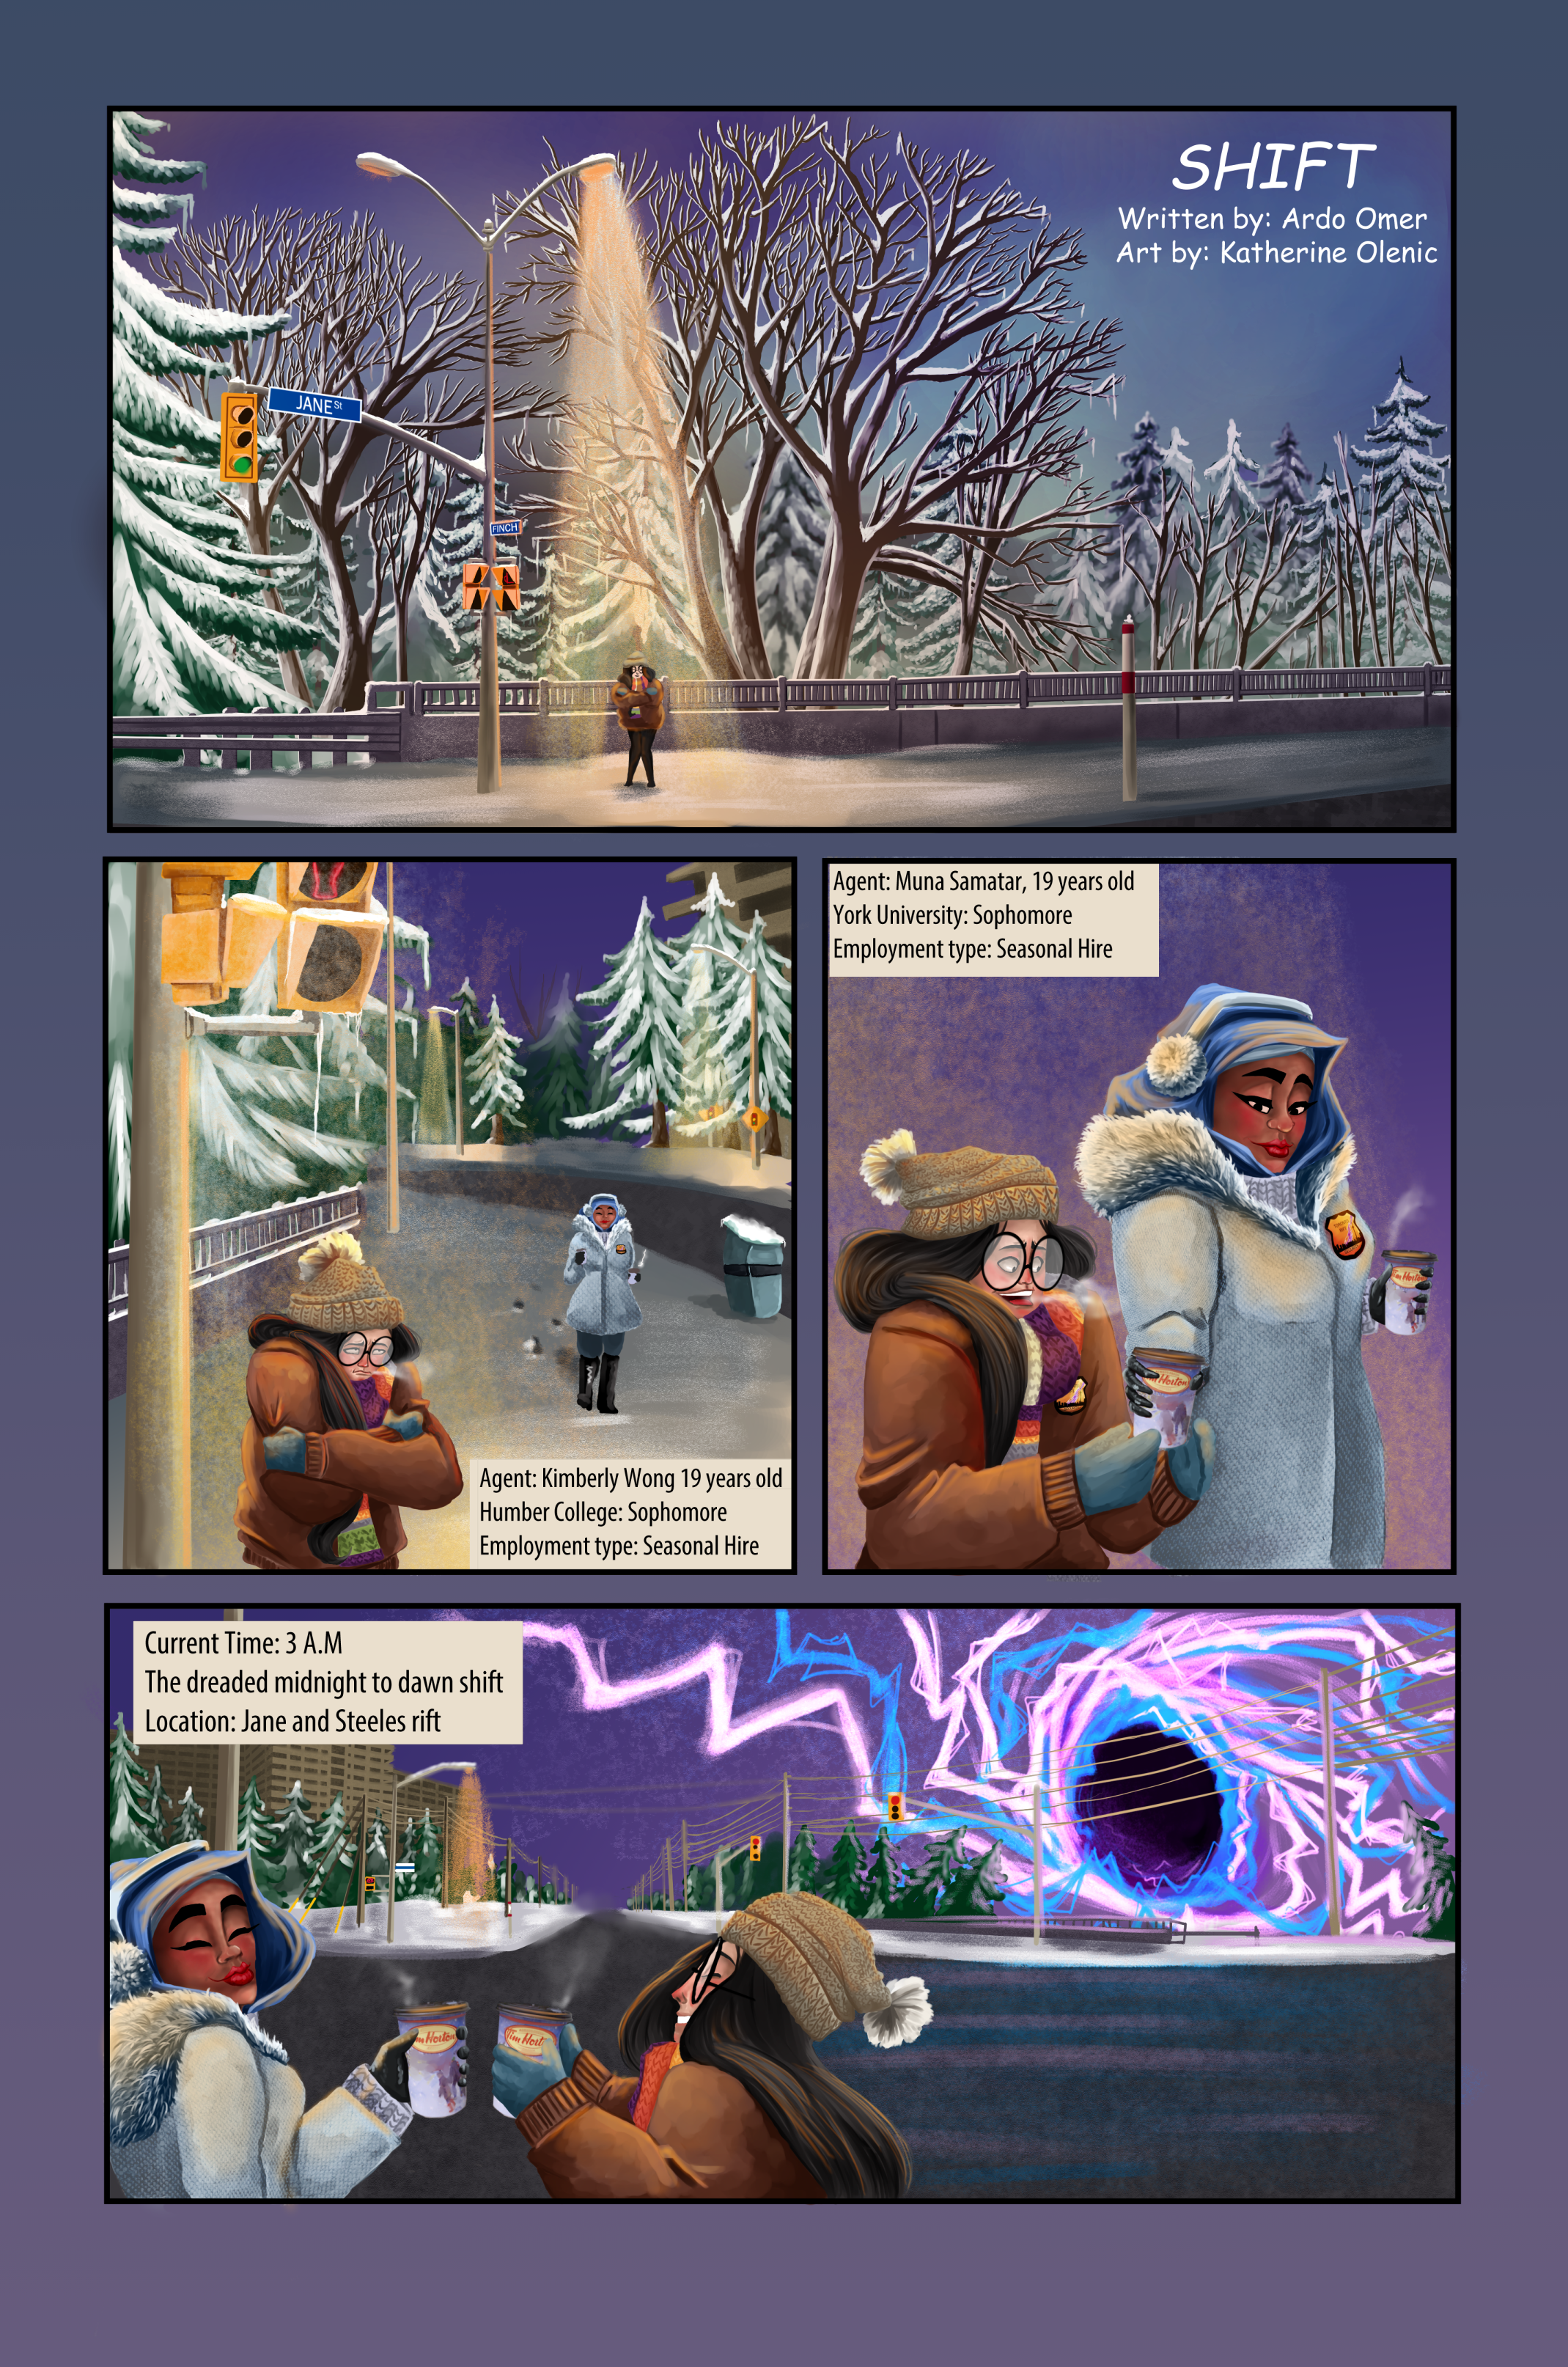 A multi-panel comic page showing two characters in a city on a winter night